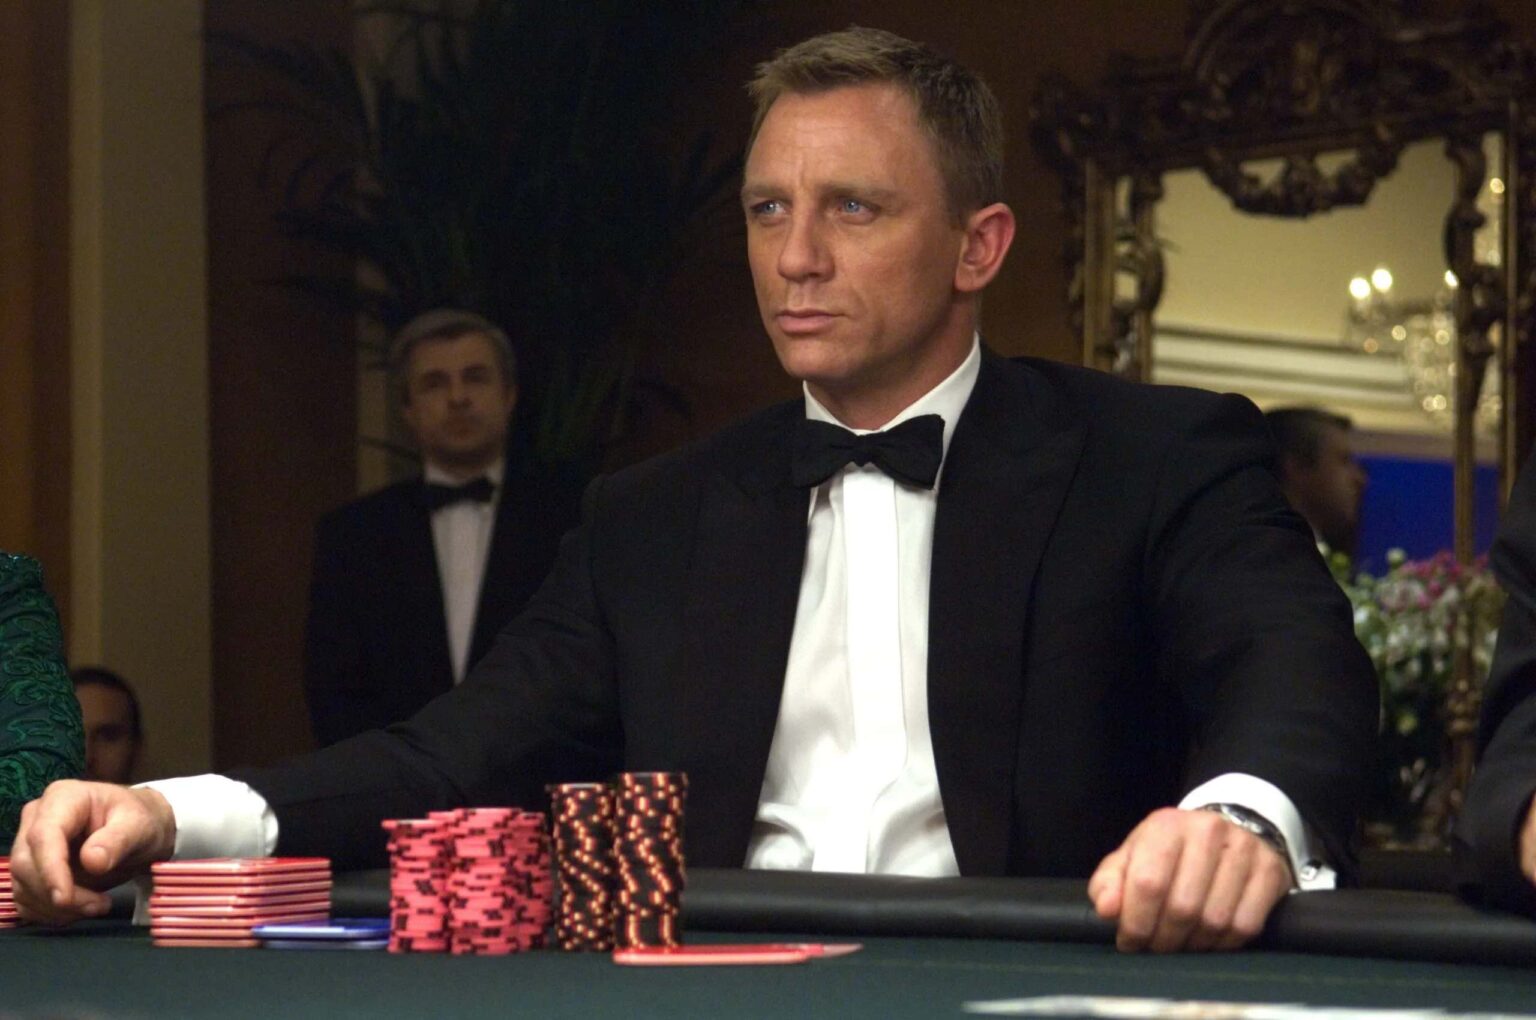 Have you ever used the James Bond Roulette Strategy at a casino? Discover the technique and get started upping your roulette game for bigger wins today.